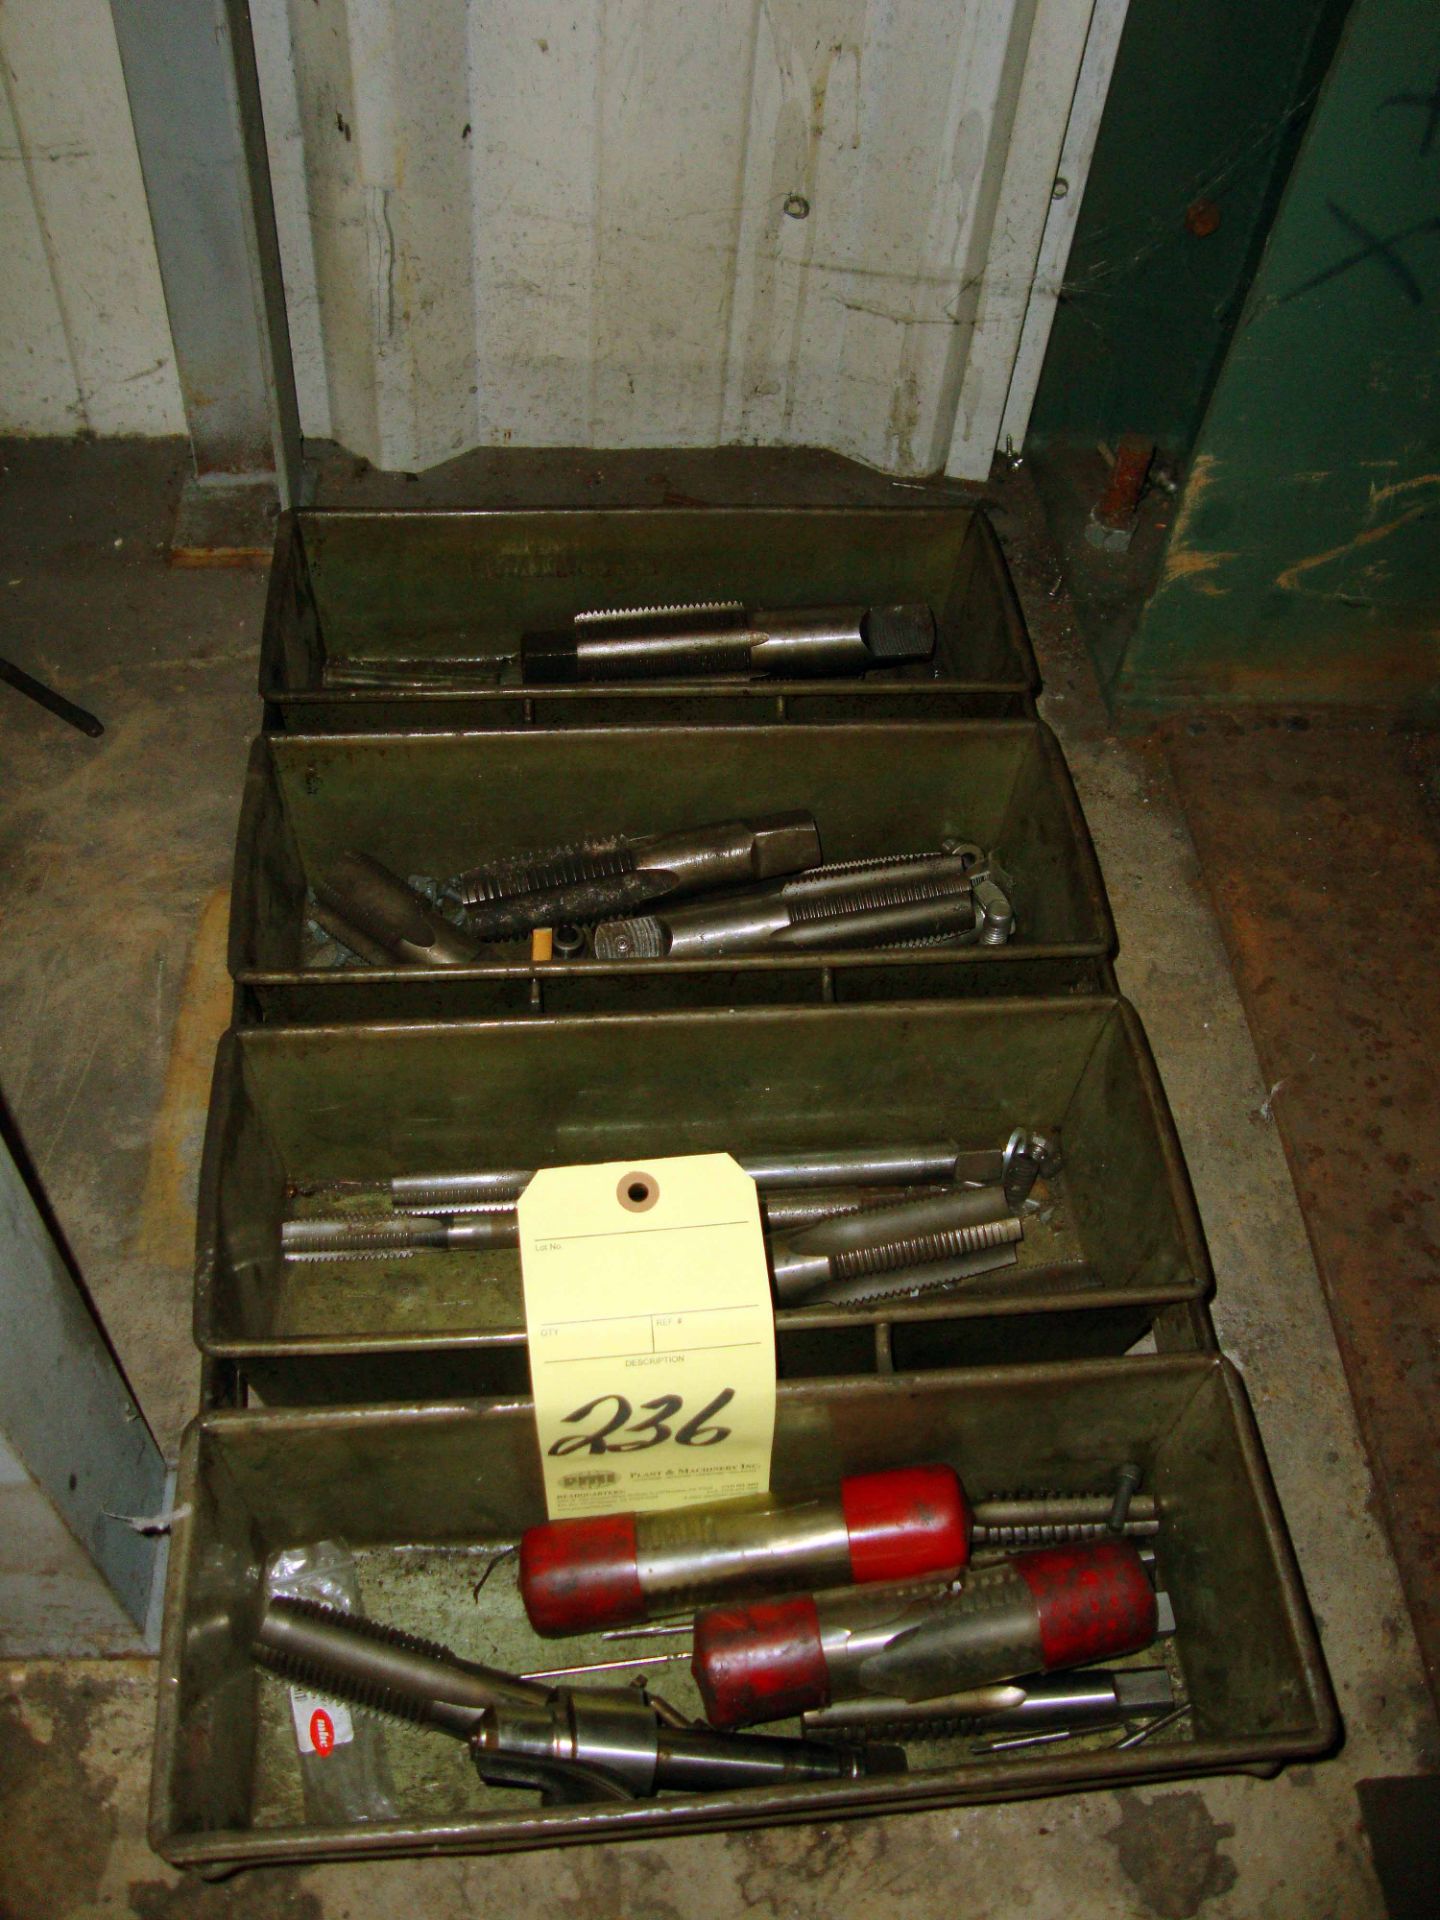 LOT OF HIGH SPEED TAPS (in four pans) (located on floor under rack)